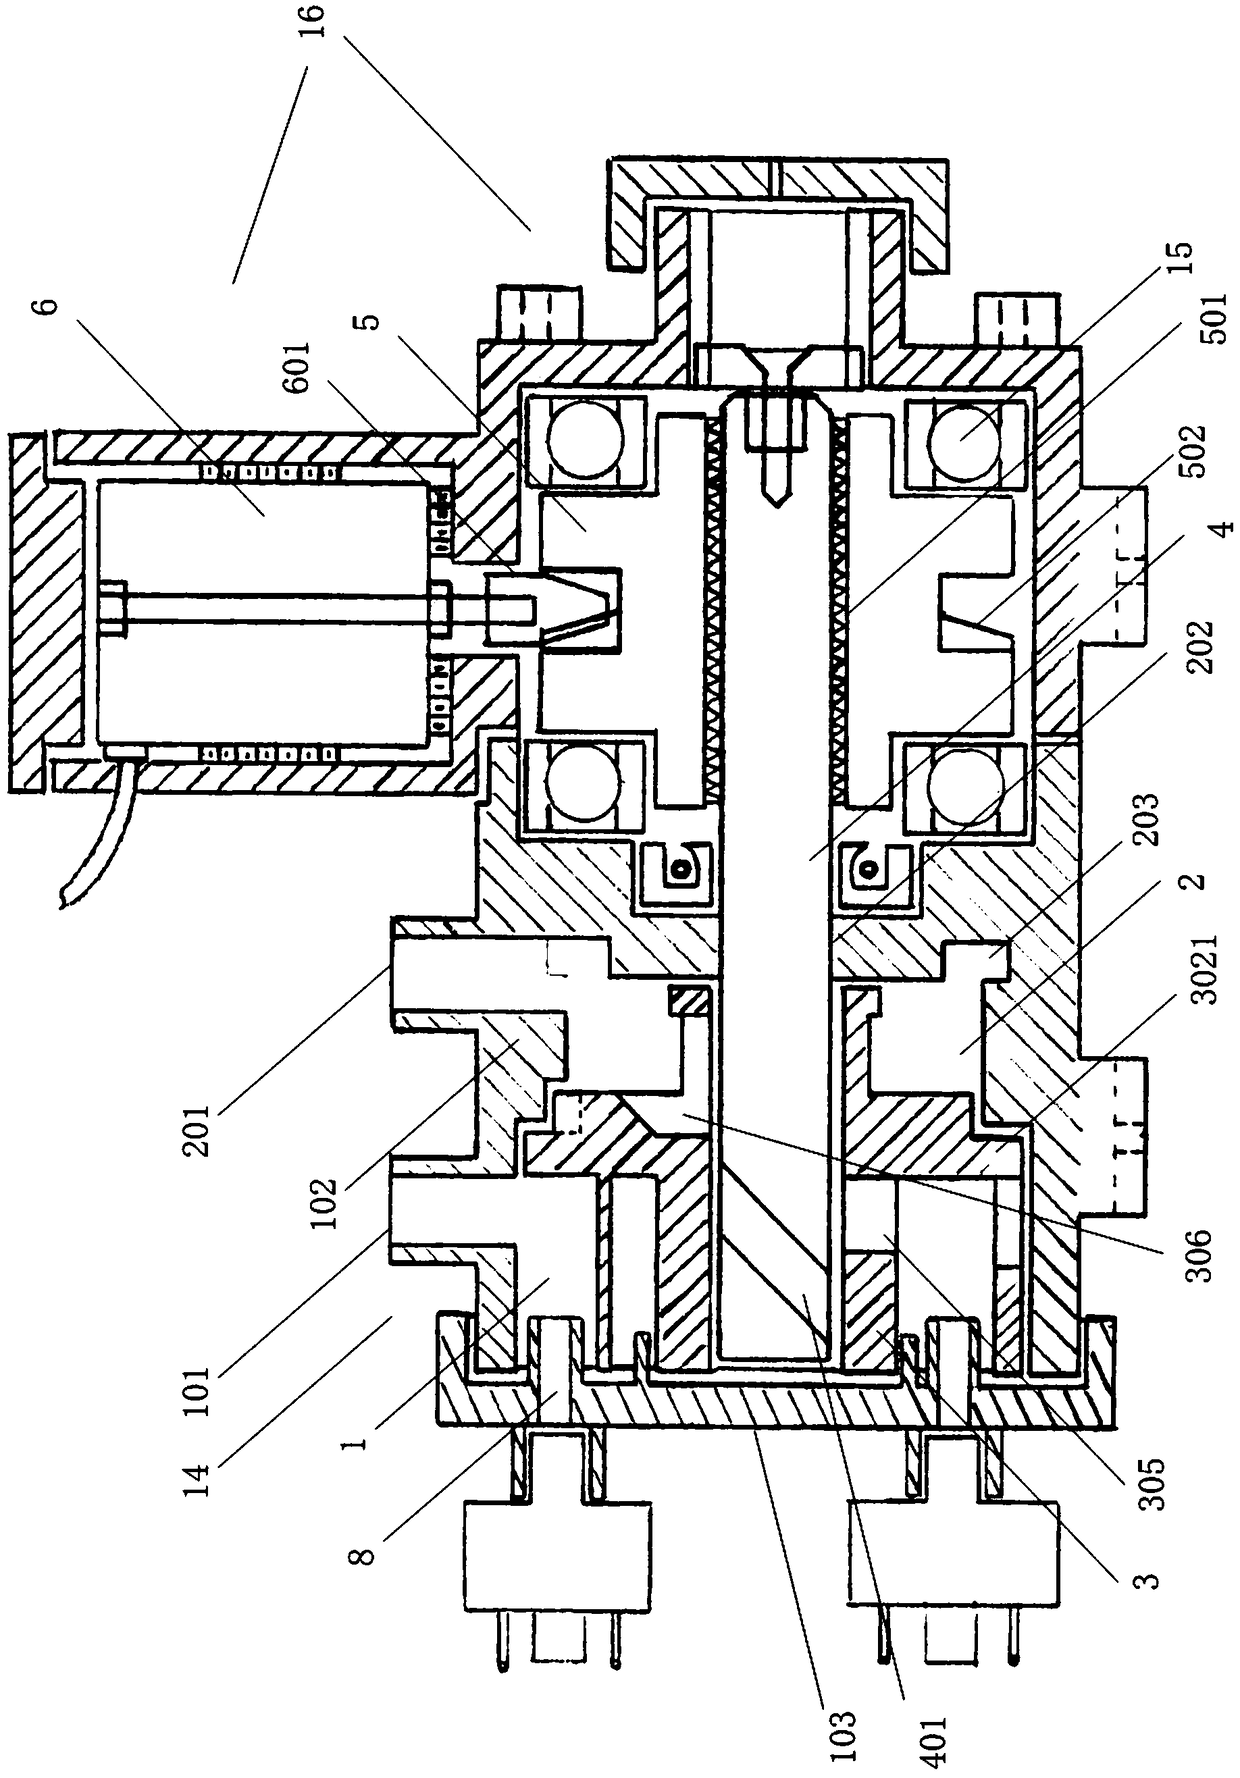 Drainage device and system for controlling concentrated water discharge in water purification process